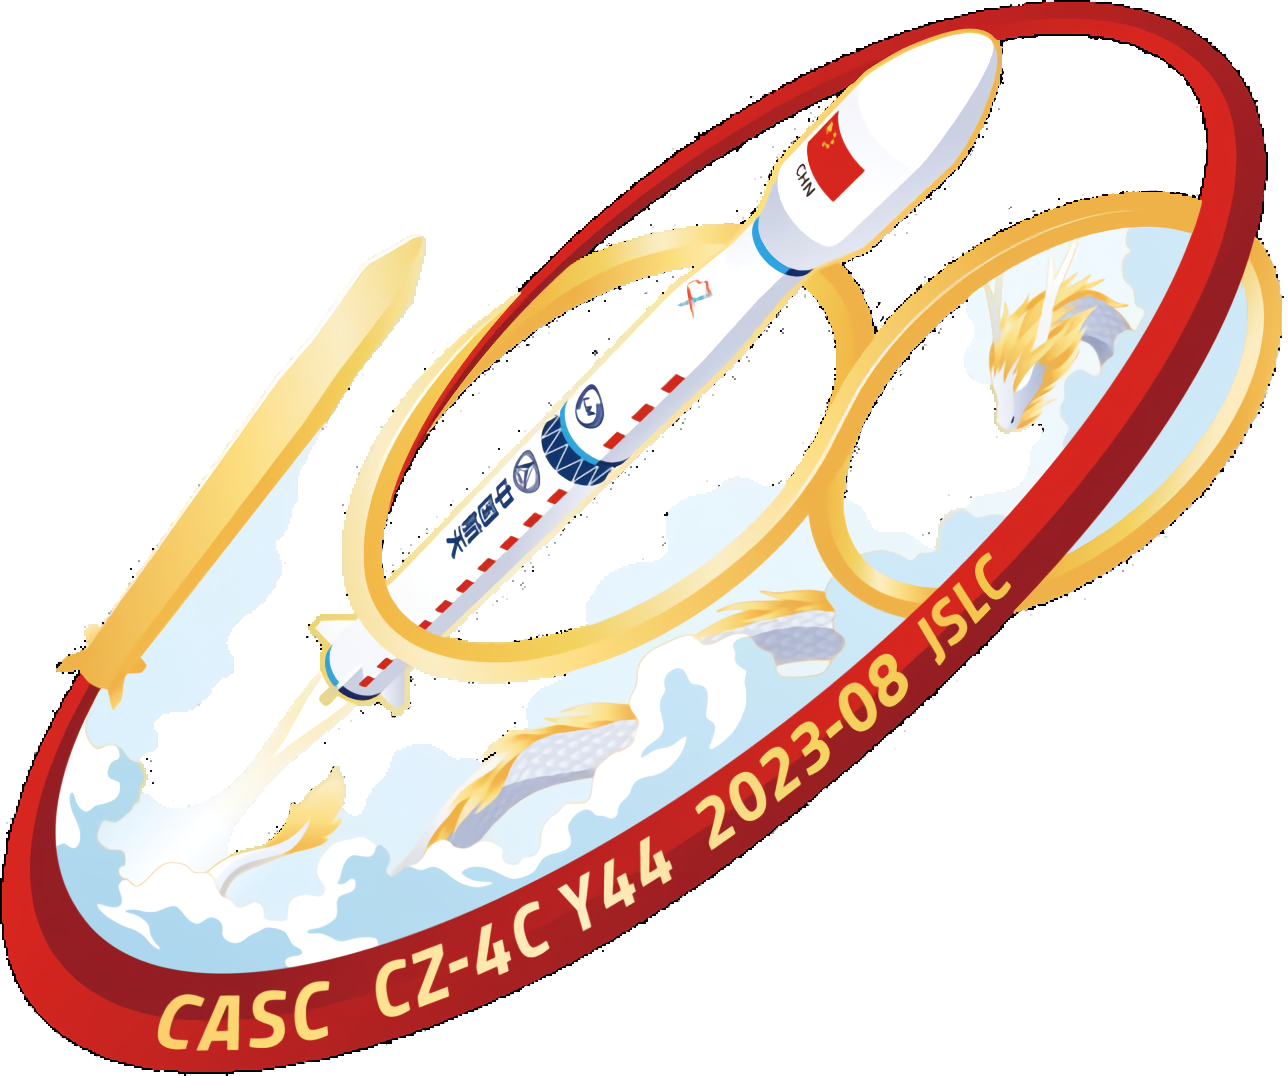 Mission patch for Fengyun-3F